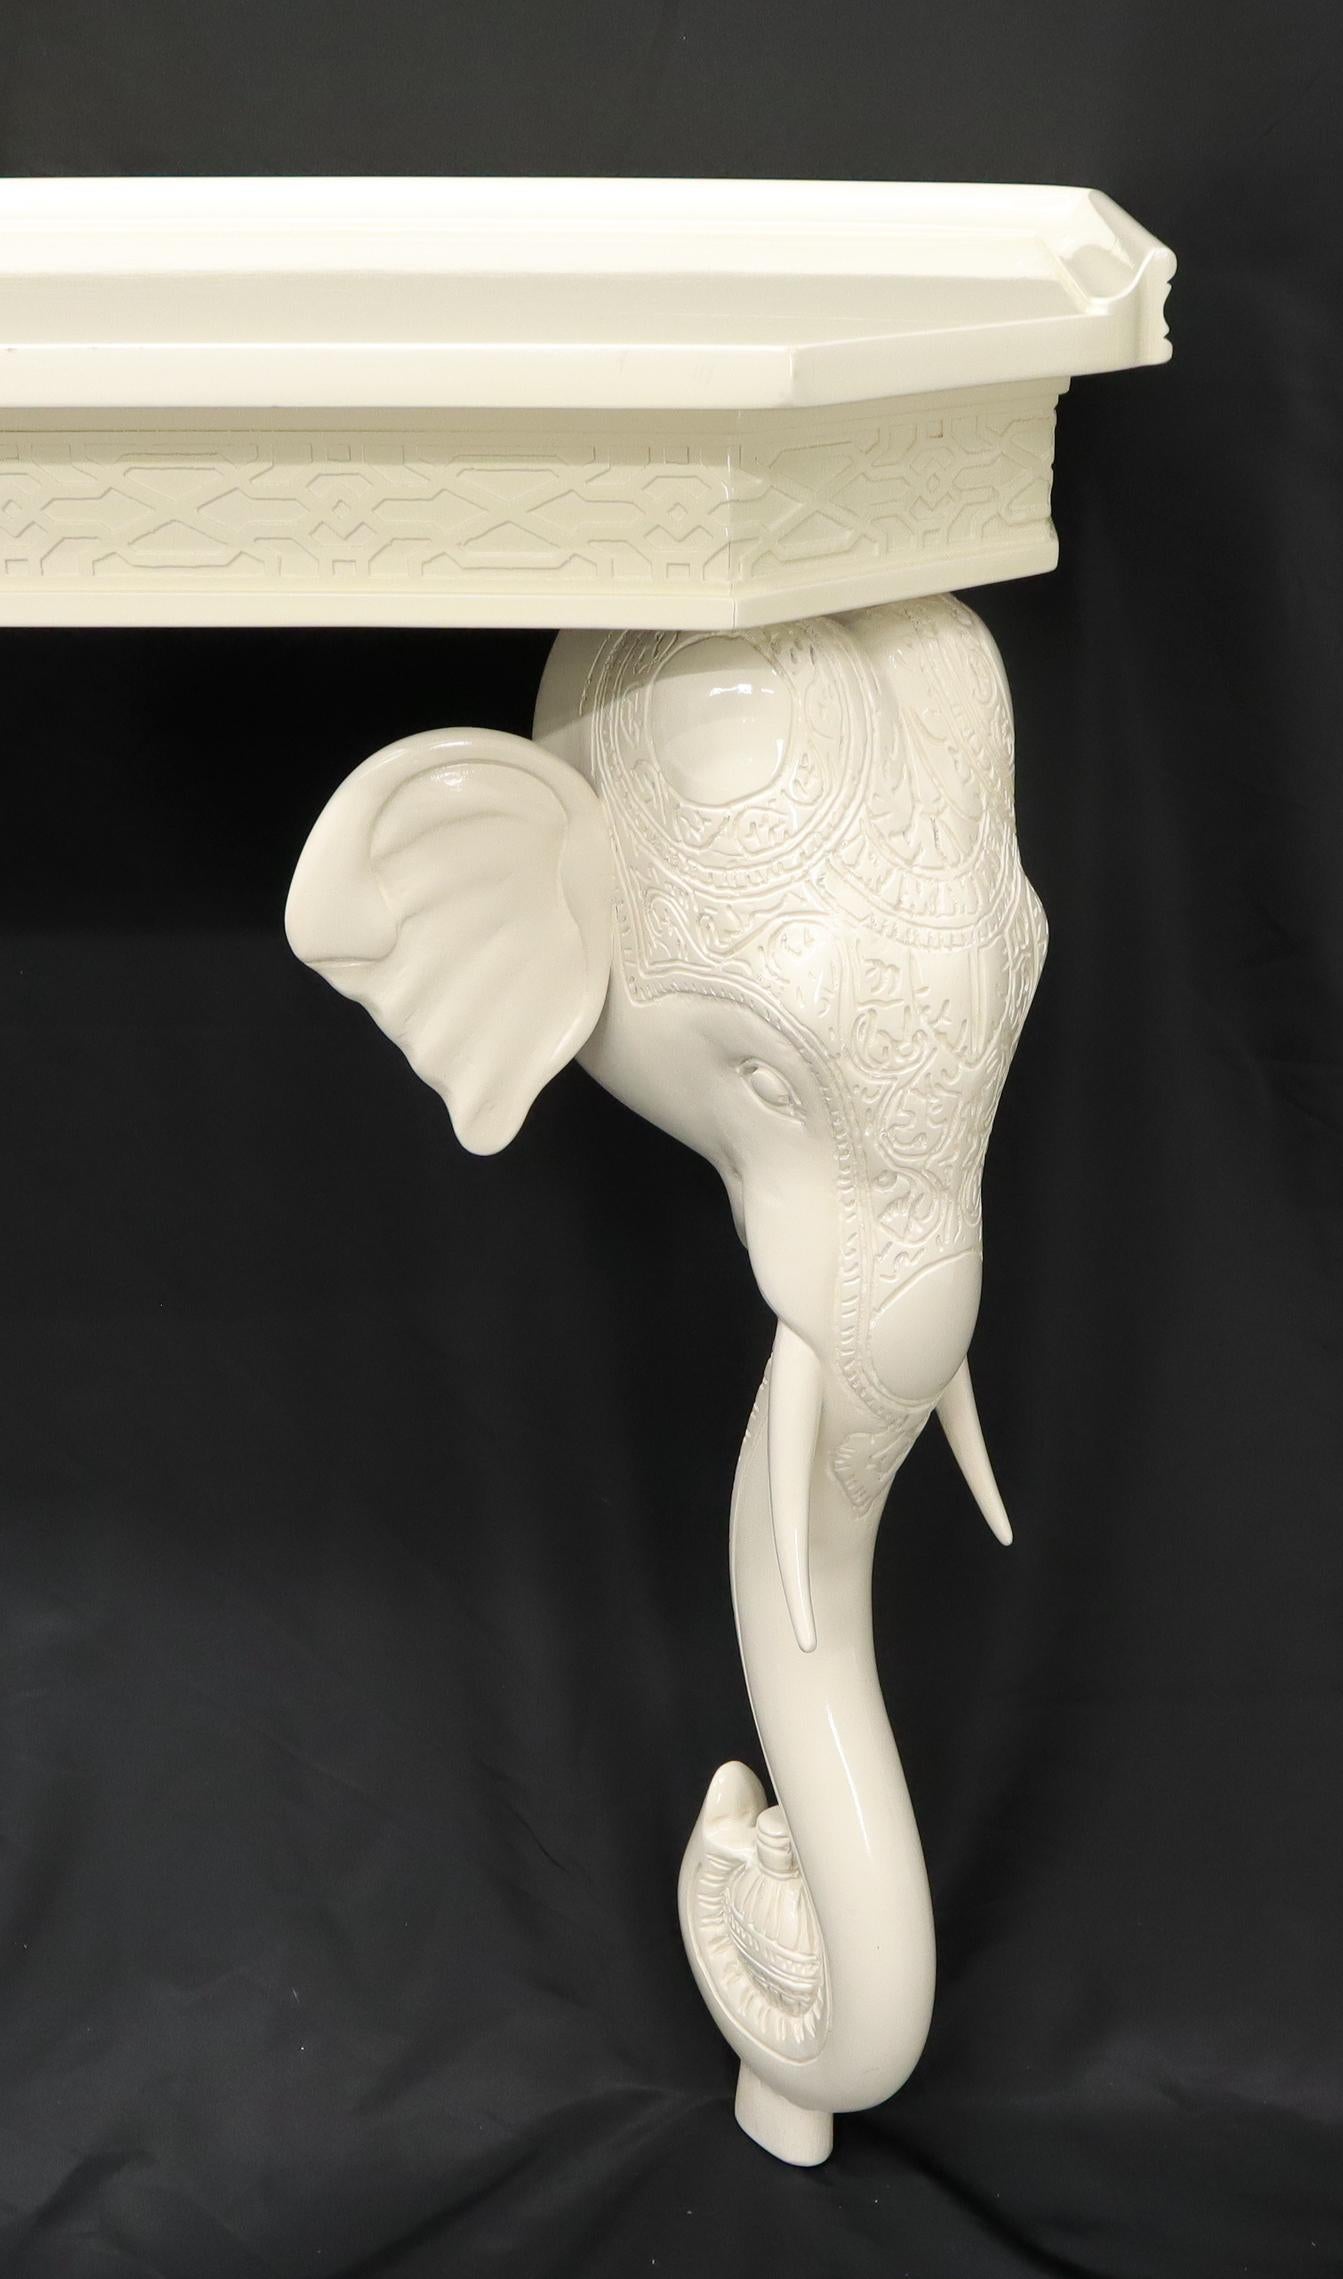 Decorative Mid-Century Modern white lacquer carved elephants wall console table.